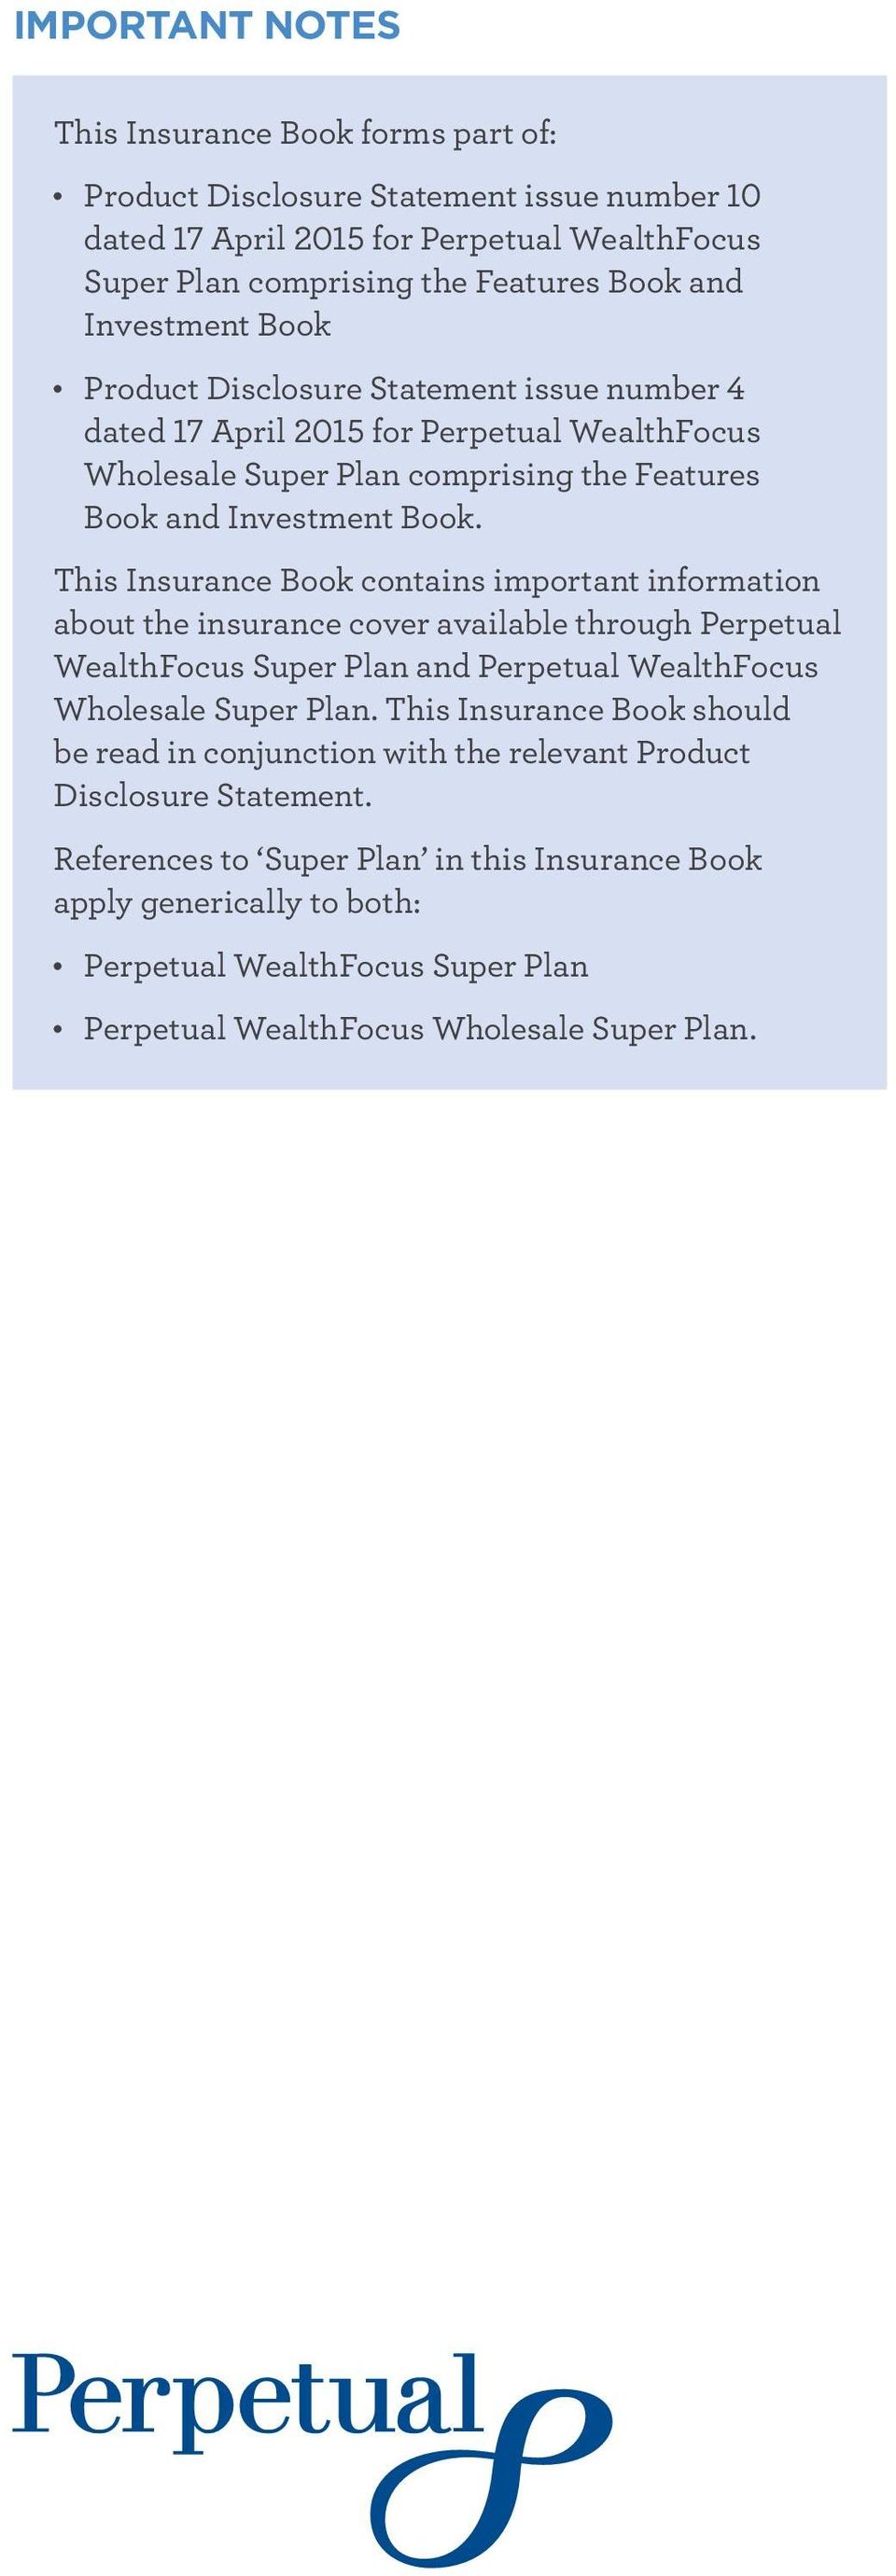 This Insurance Book contains important information about the insurance cover available through Perpetual WealthFocus Super Plan and Perpetual WealthFocus Wholesale Super Plan.